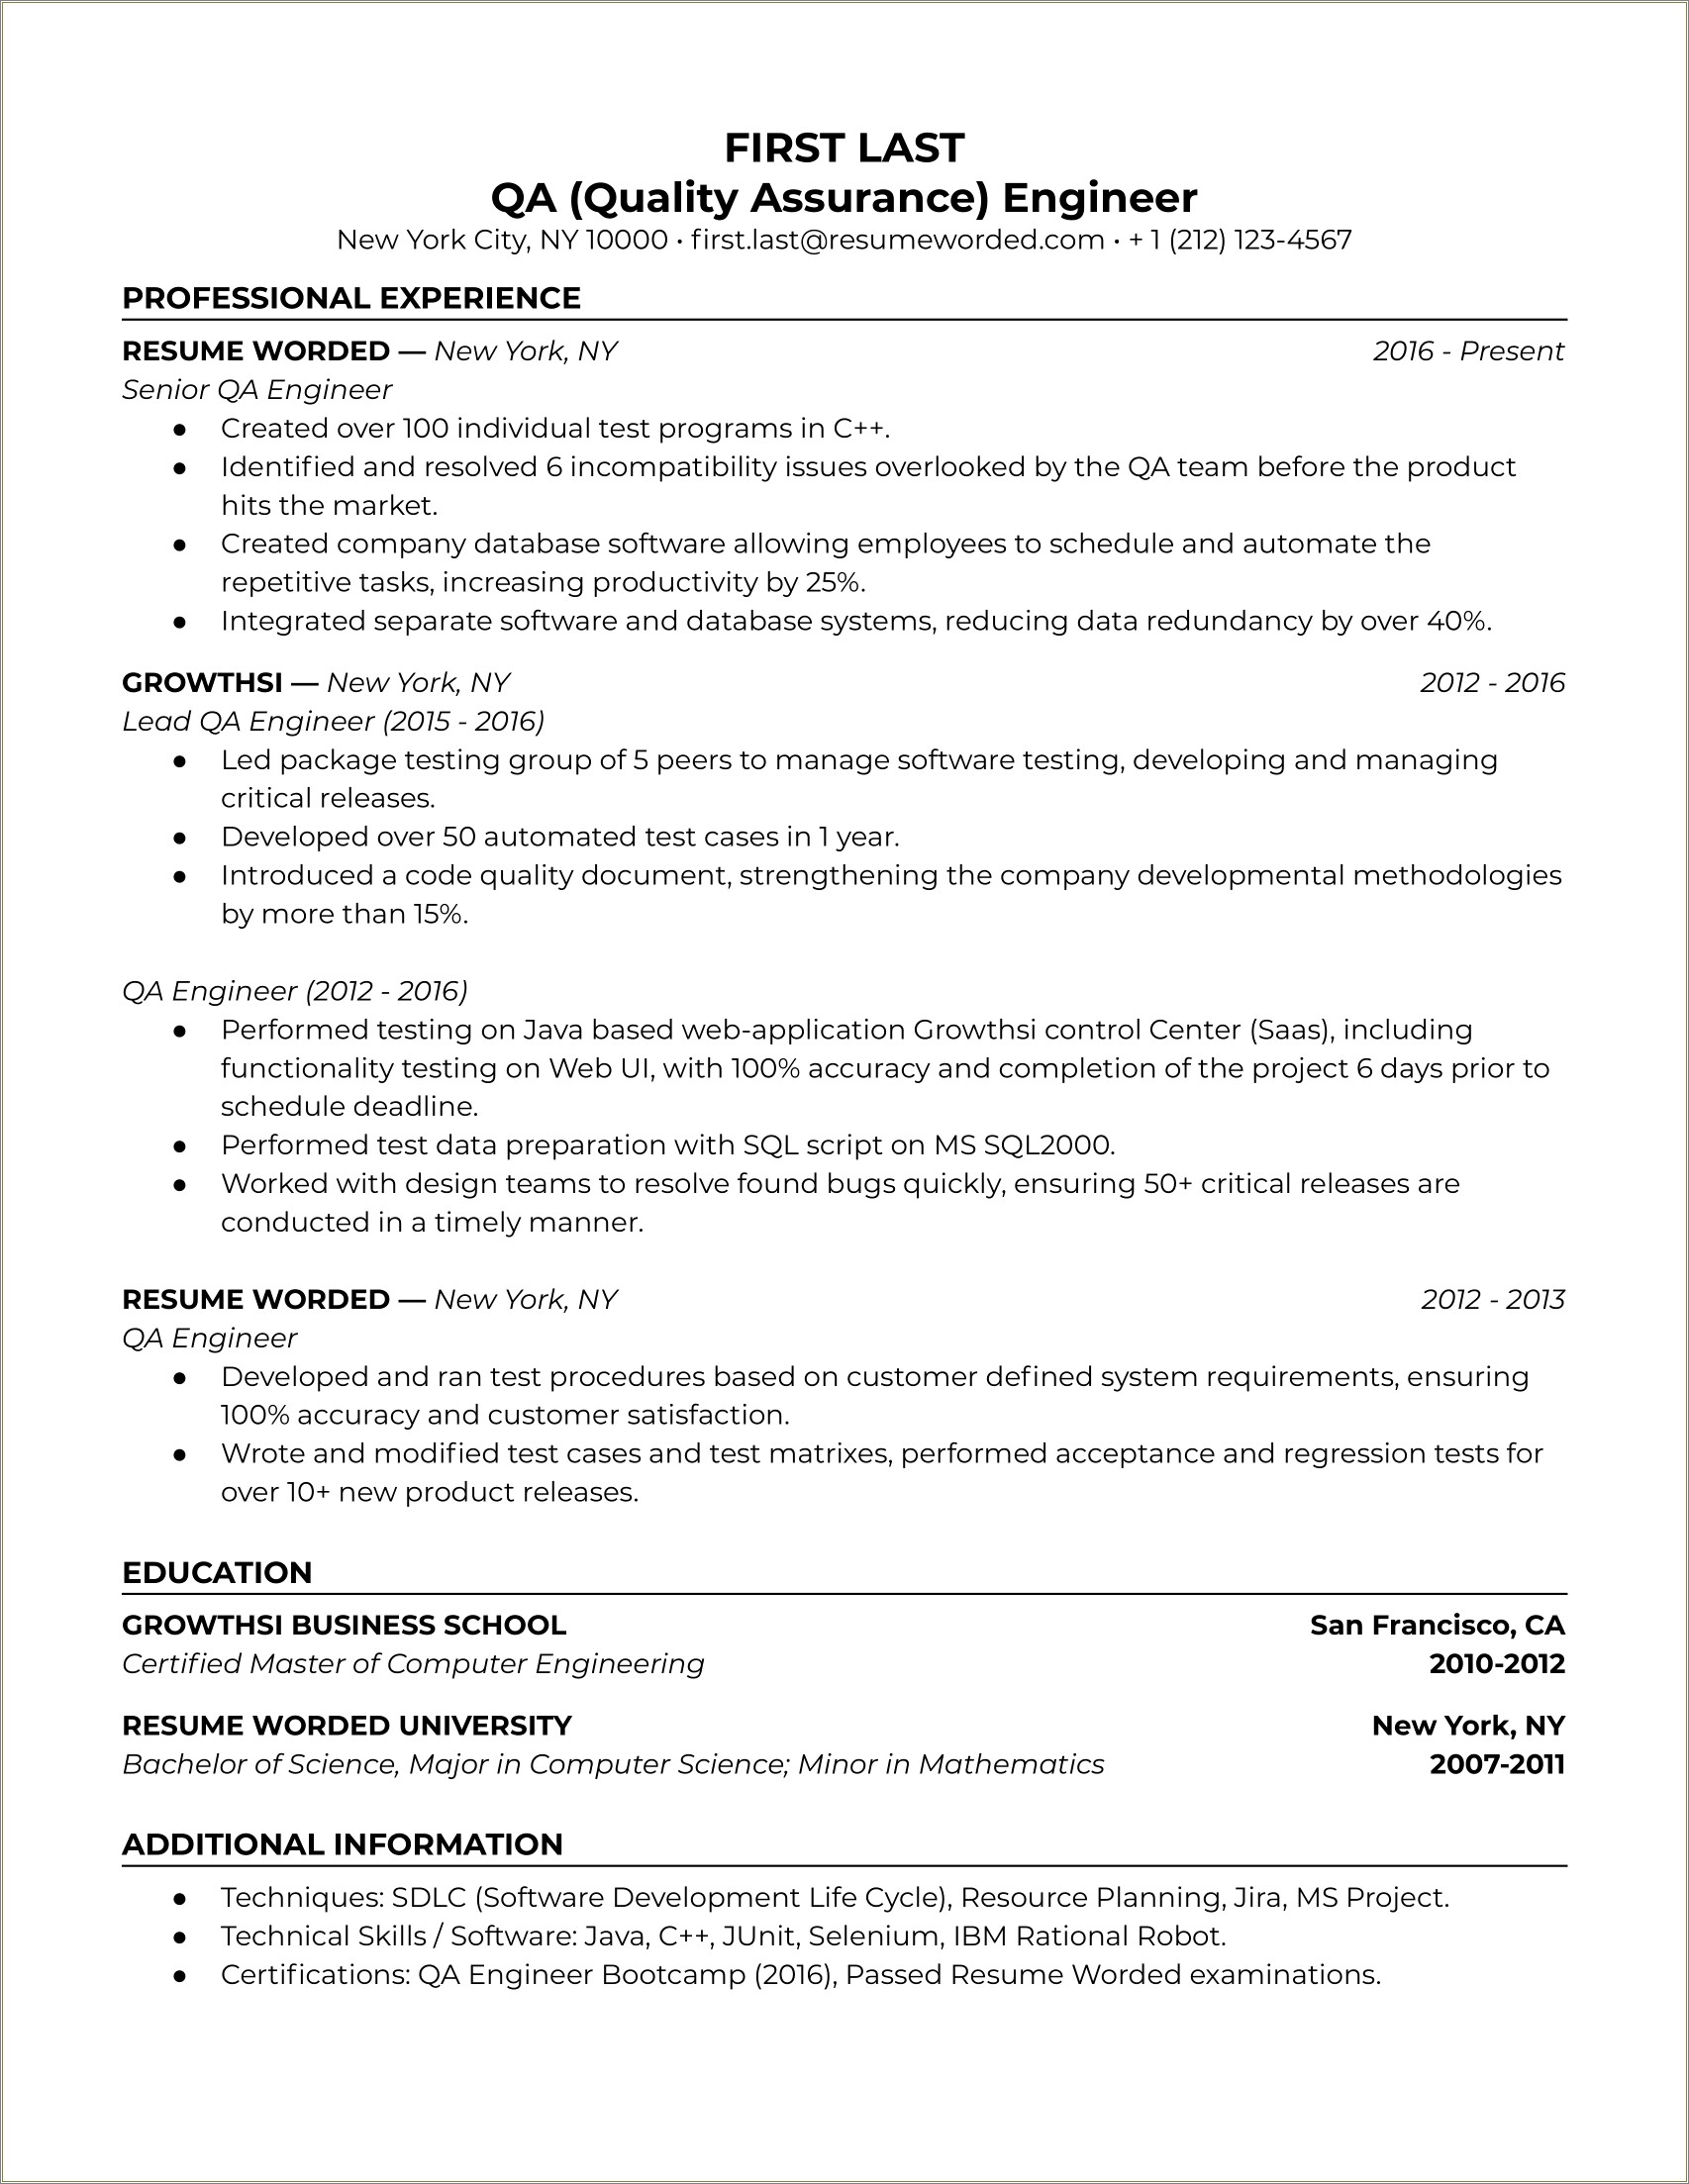 Sample Qa Resume With Role Based Security Testing